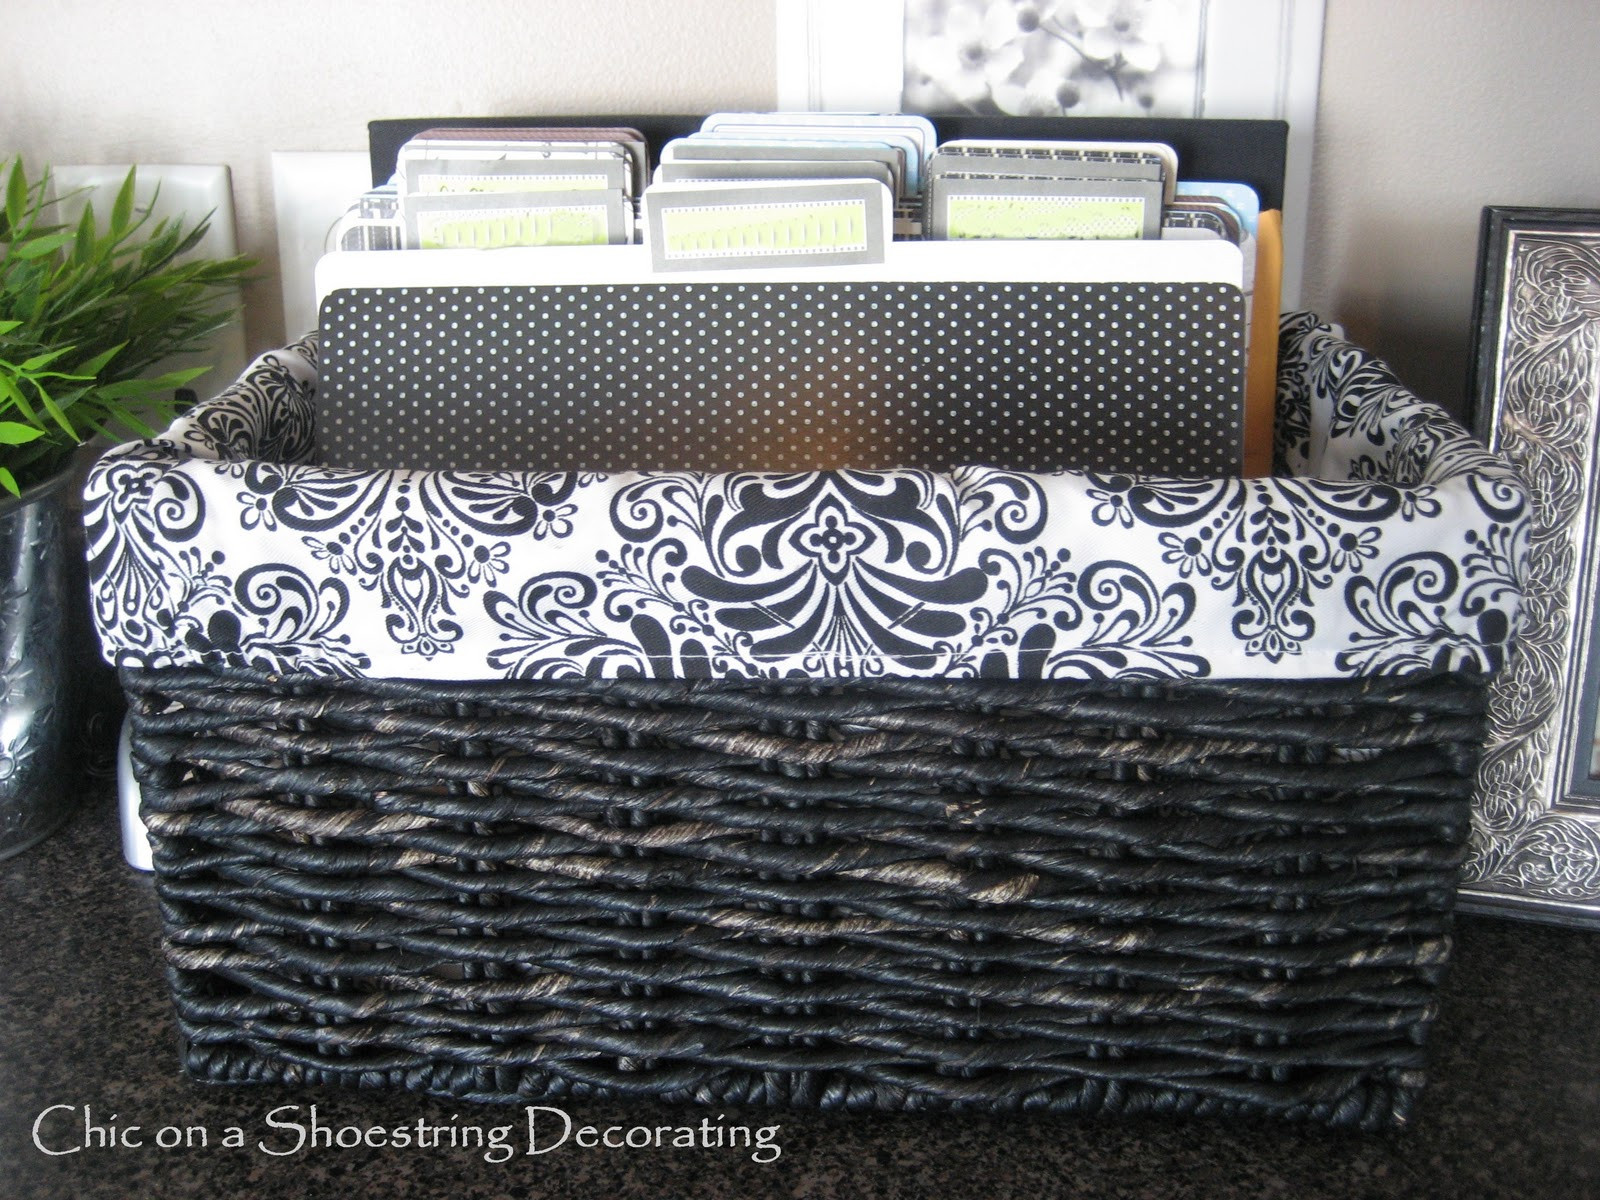 Paper Clutter Organization
 Chic on a Shoestring Decorating How to Organize Paper Clutter